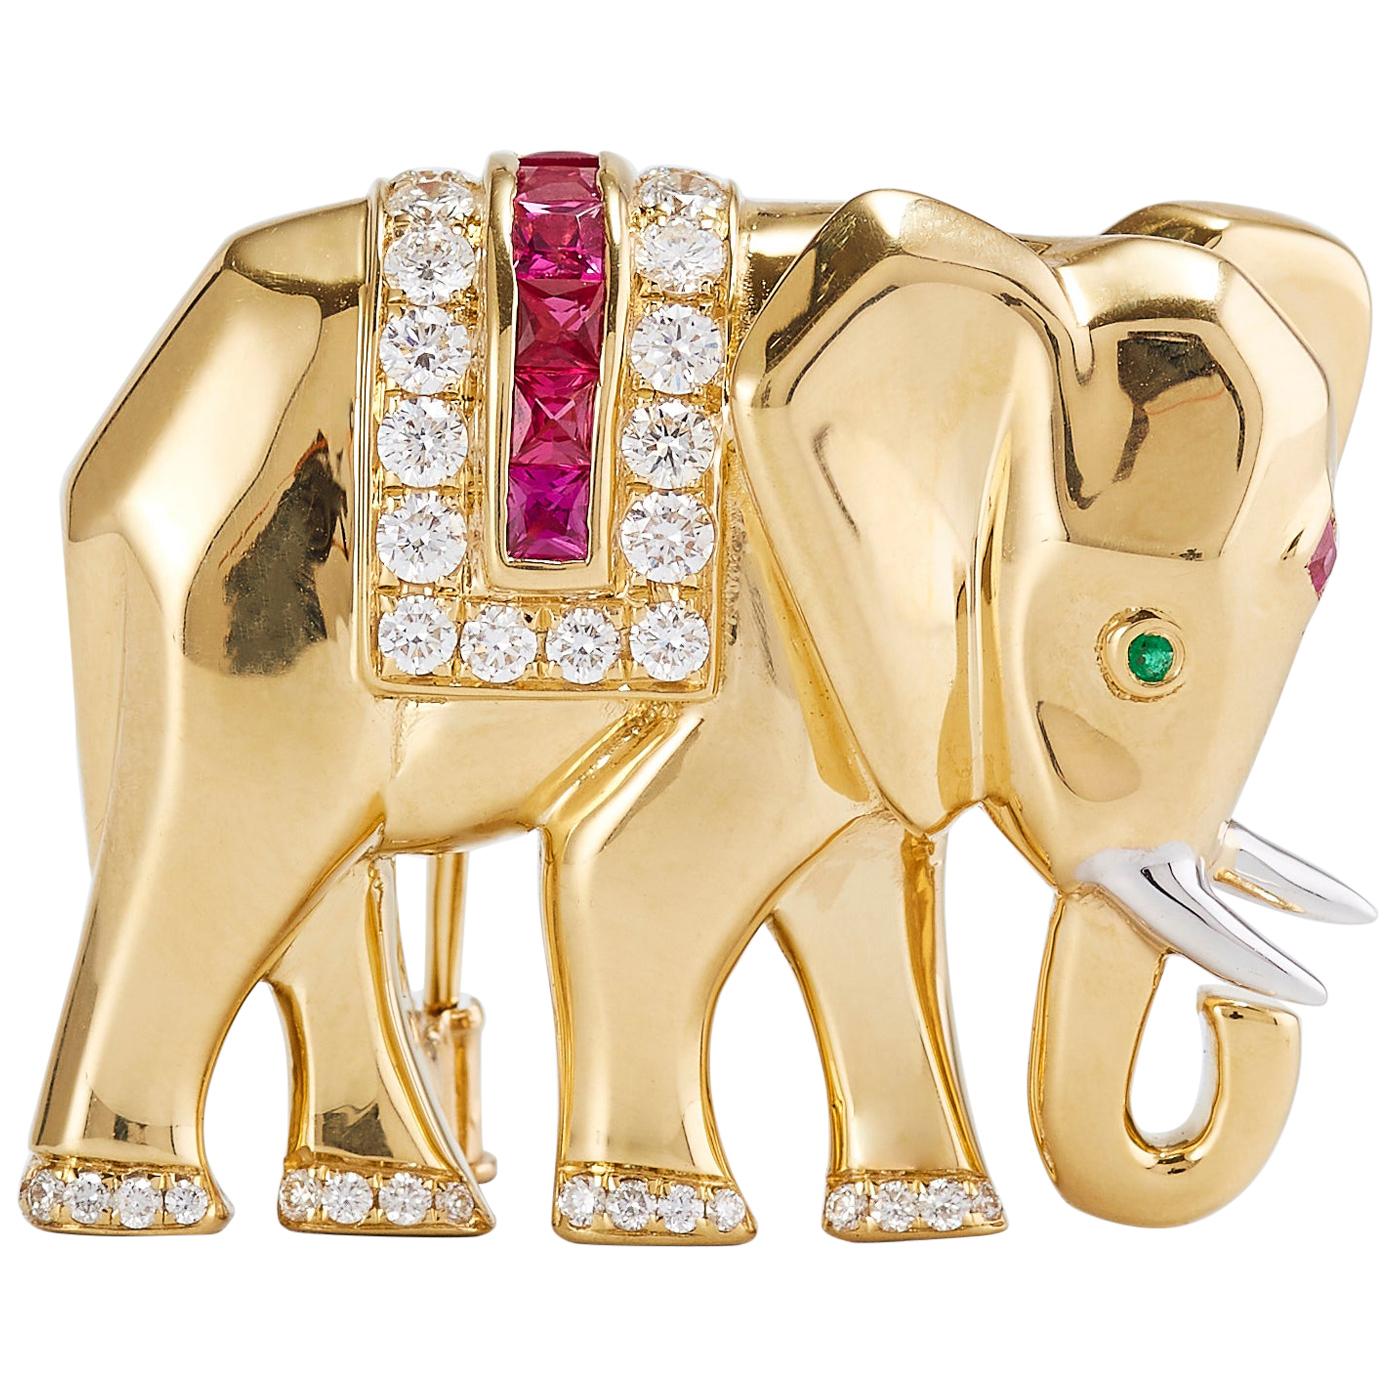 Vintage Cartier Elephant Pin/Brooch in Yellow Gold with Diamond Ruby and Emerald